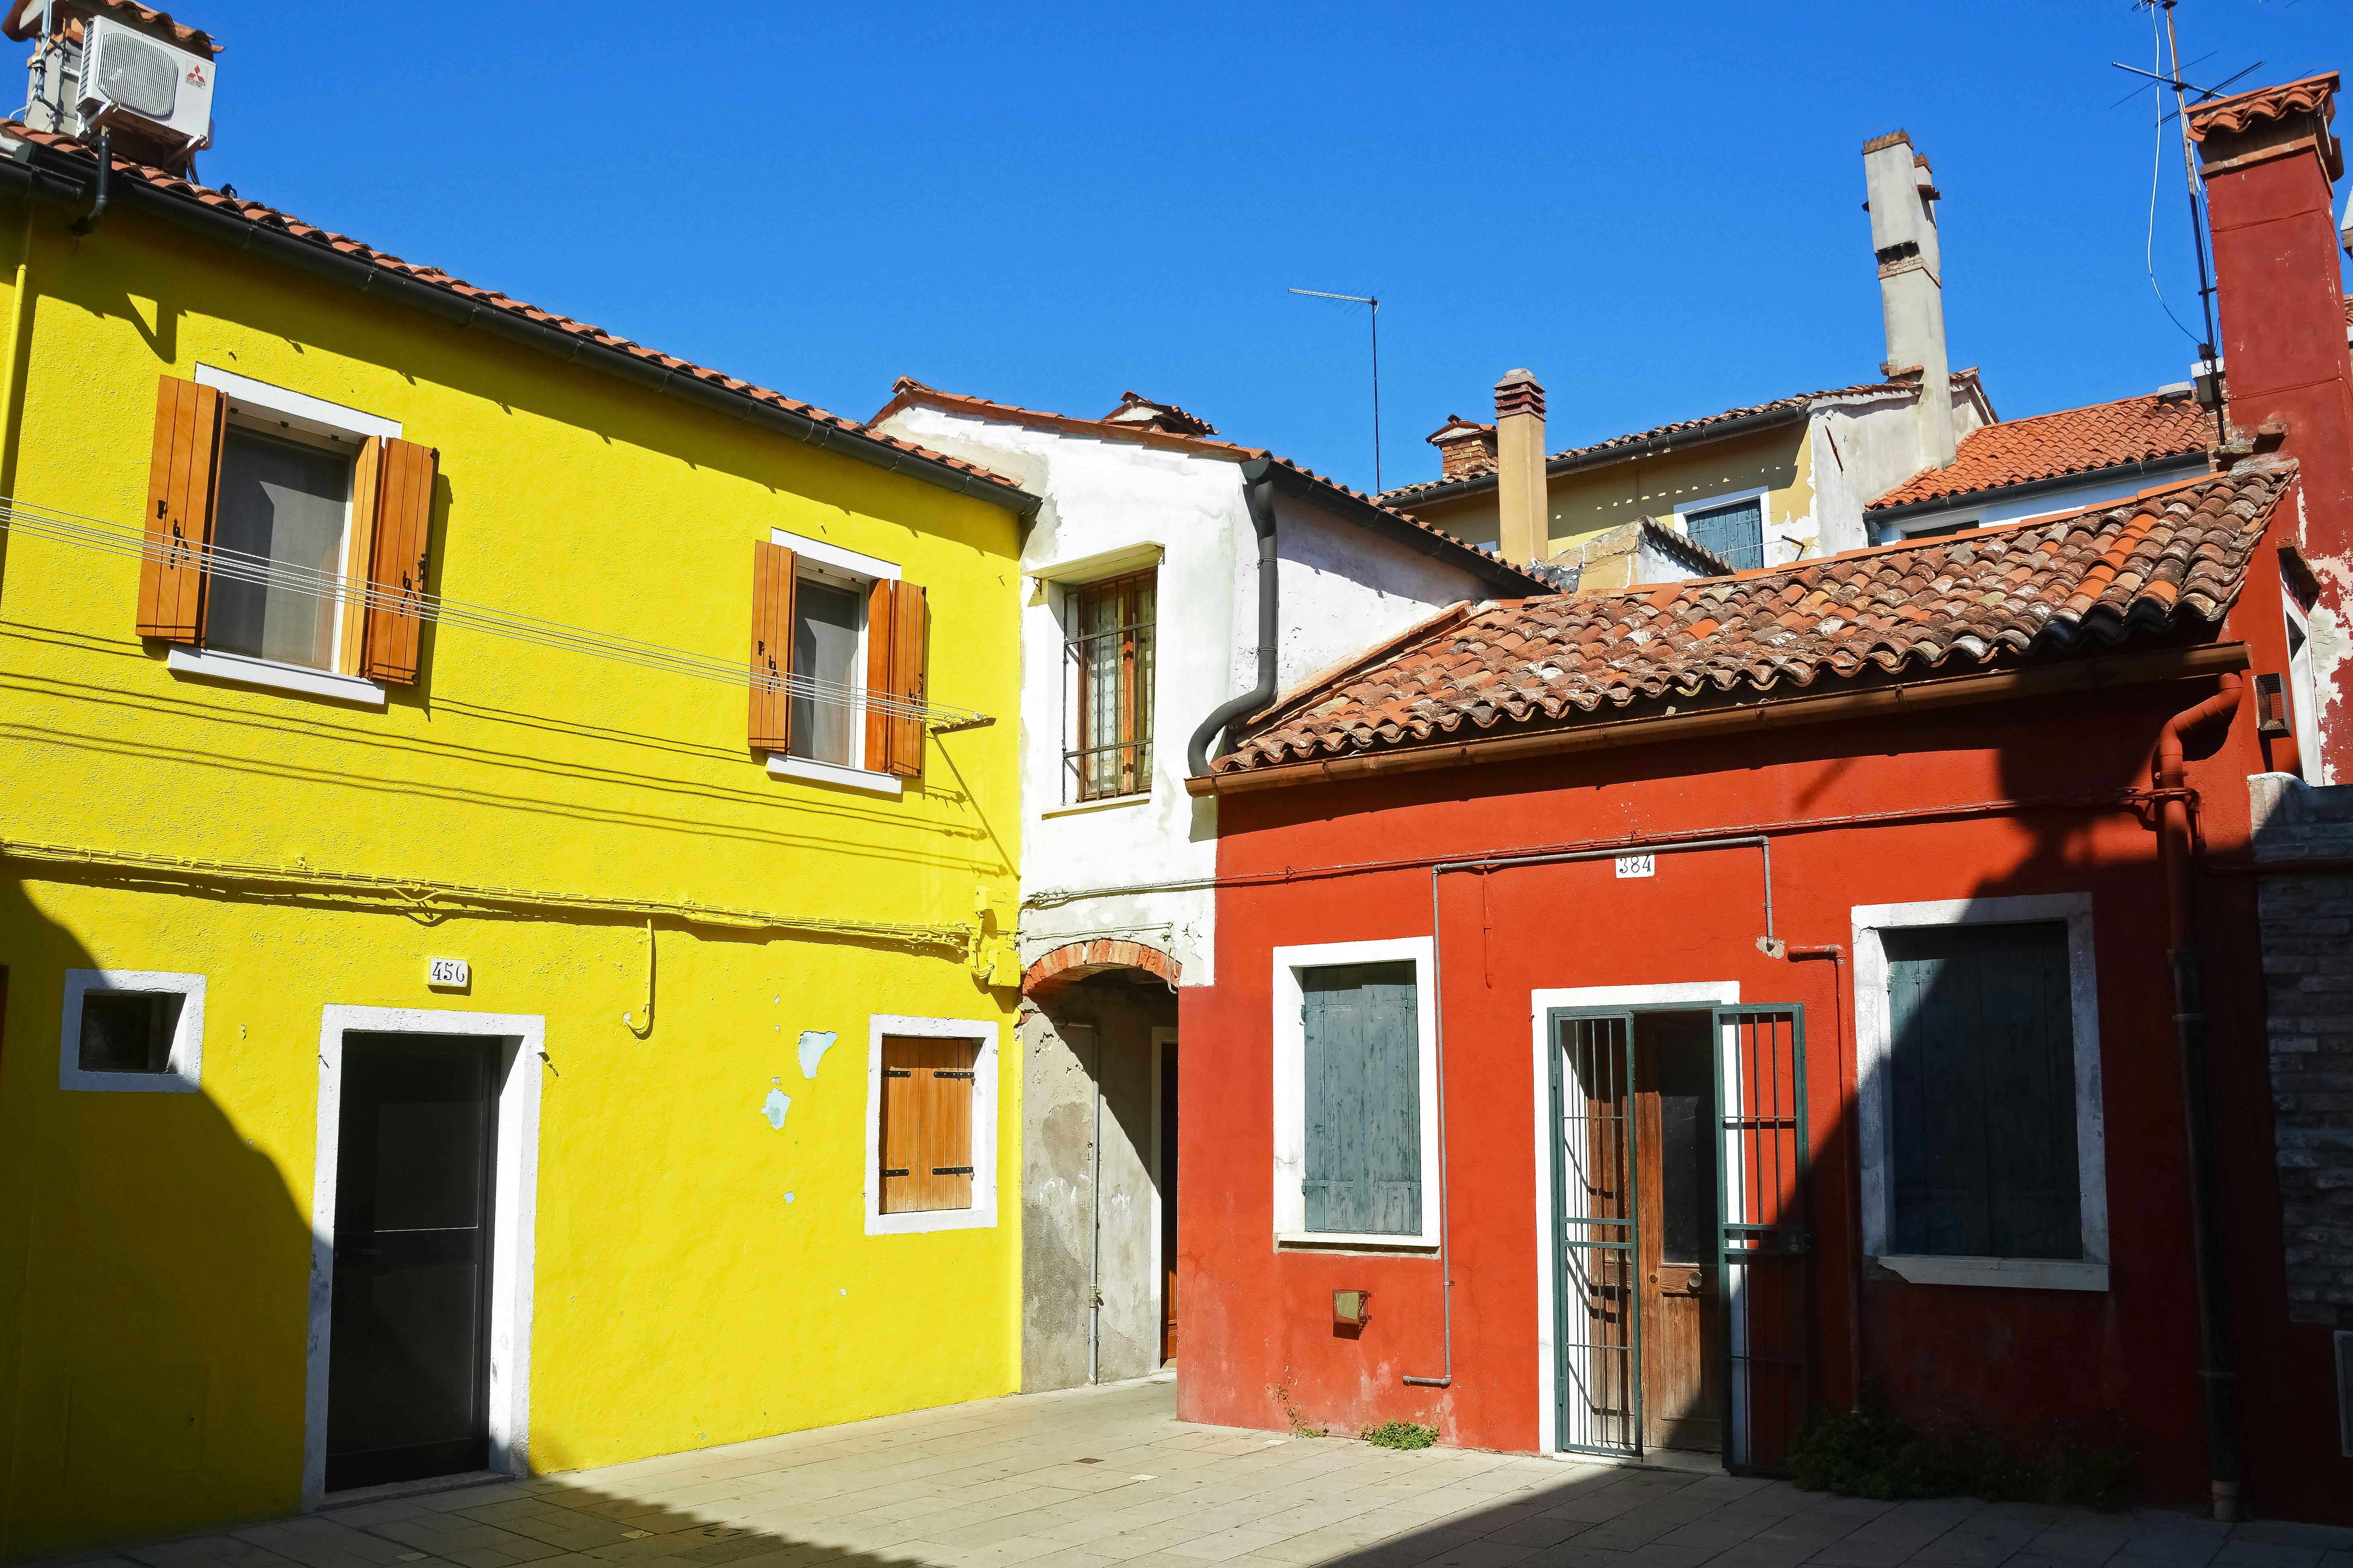 yellow and red concrete house under blue sky during daytime